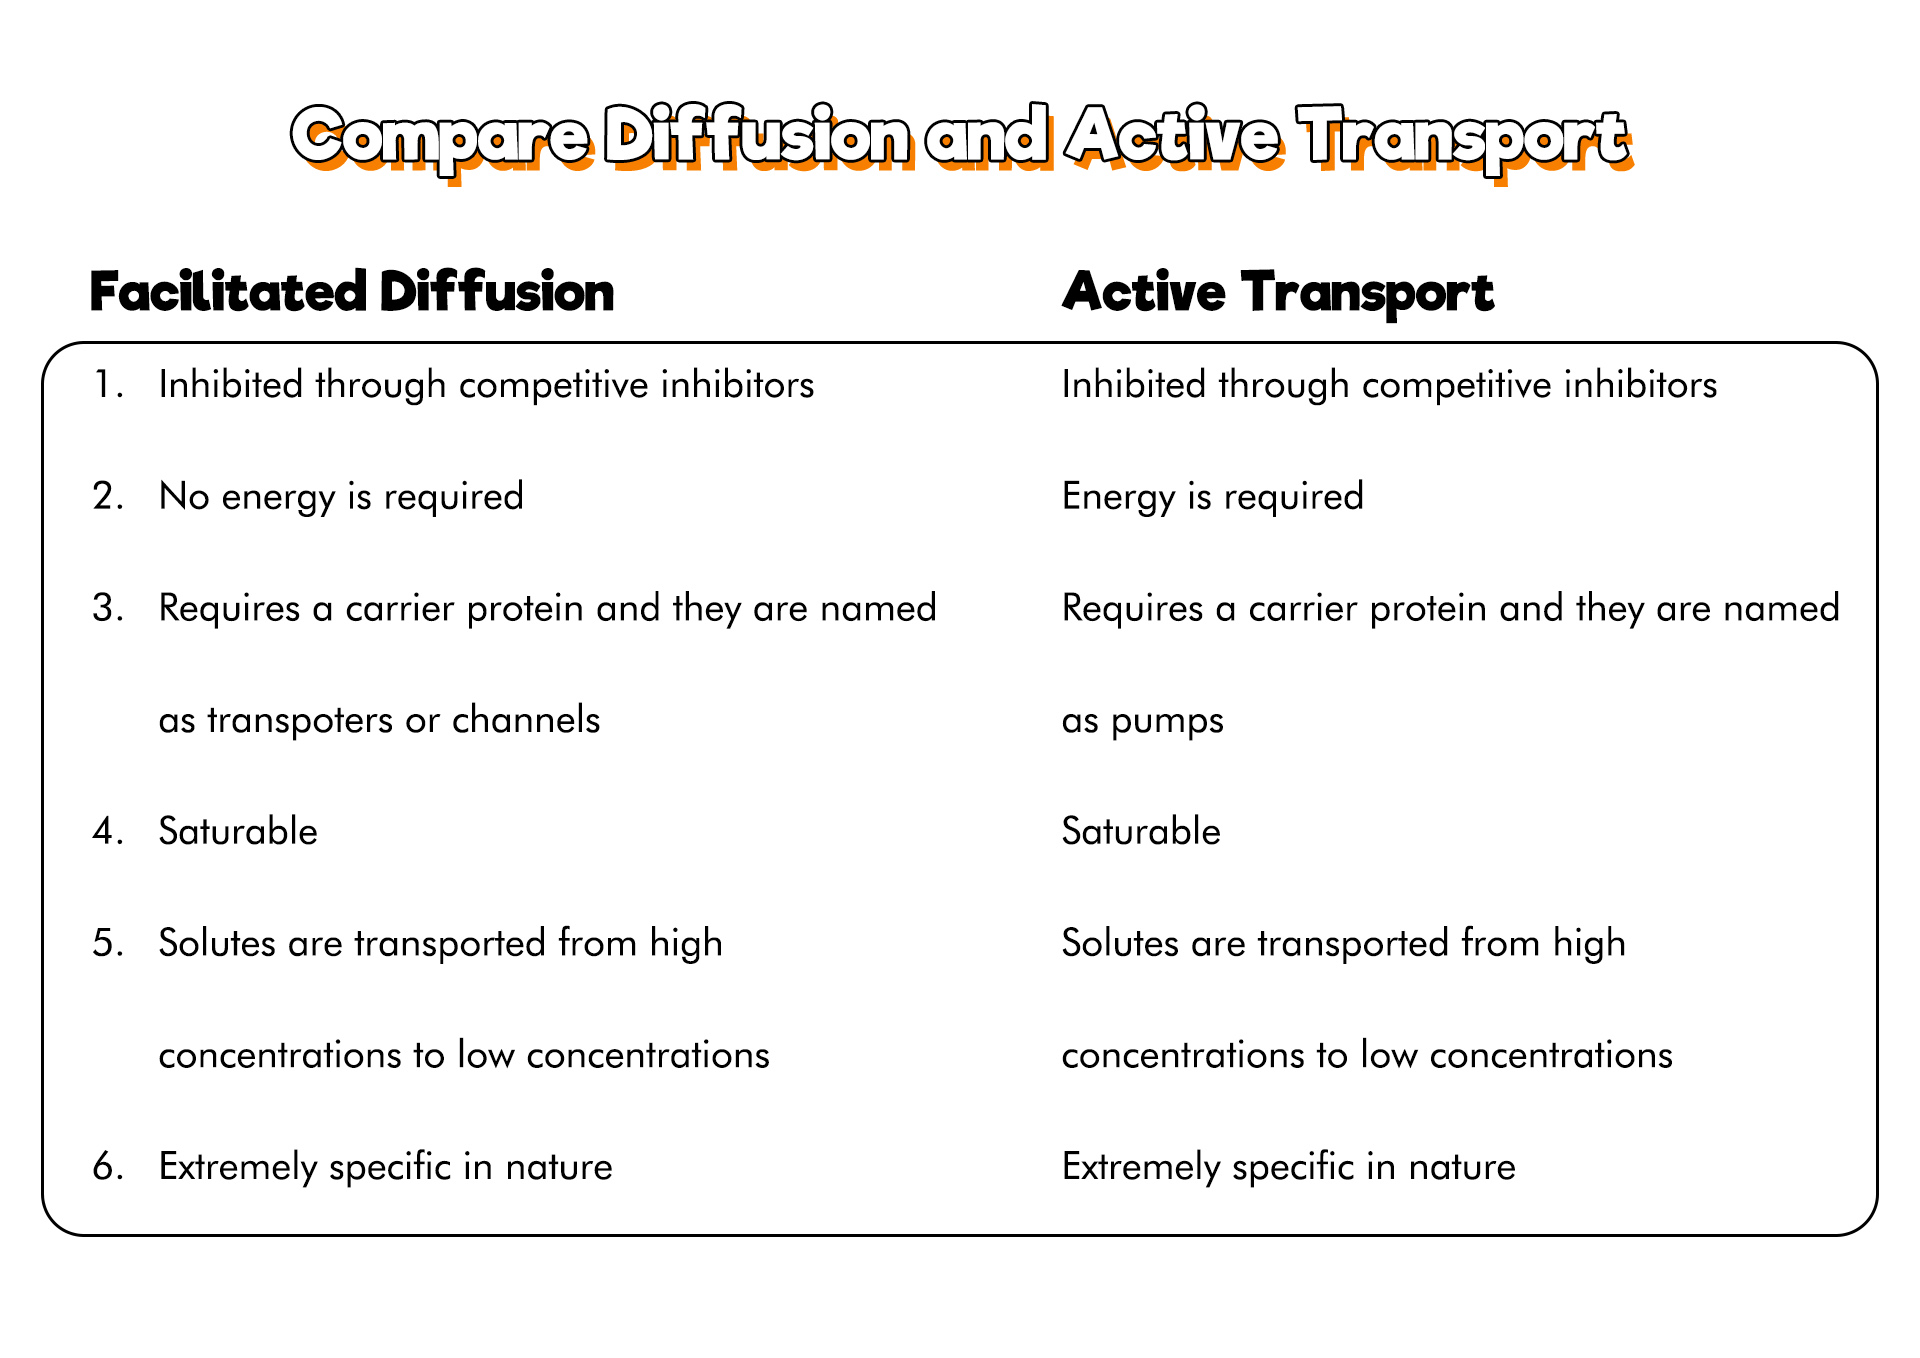 Compare Diffusion and Active Transport